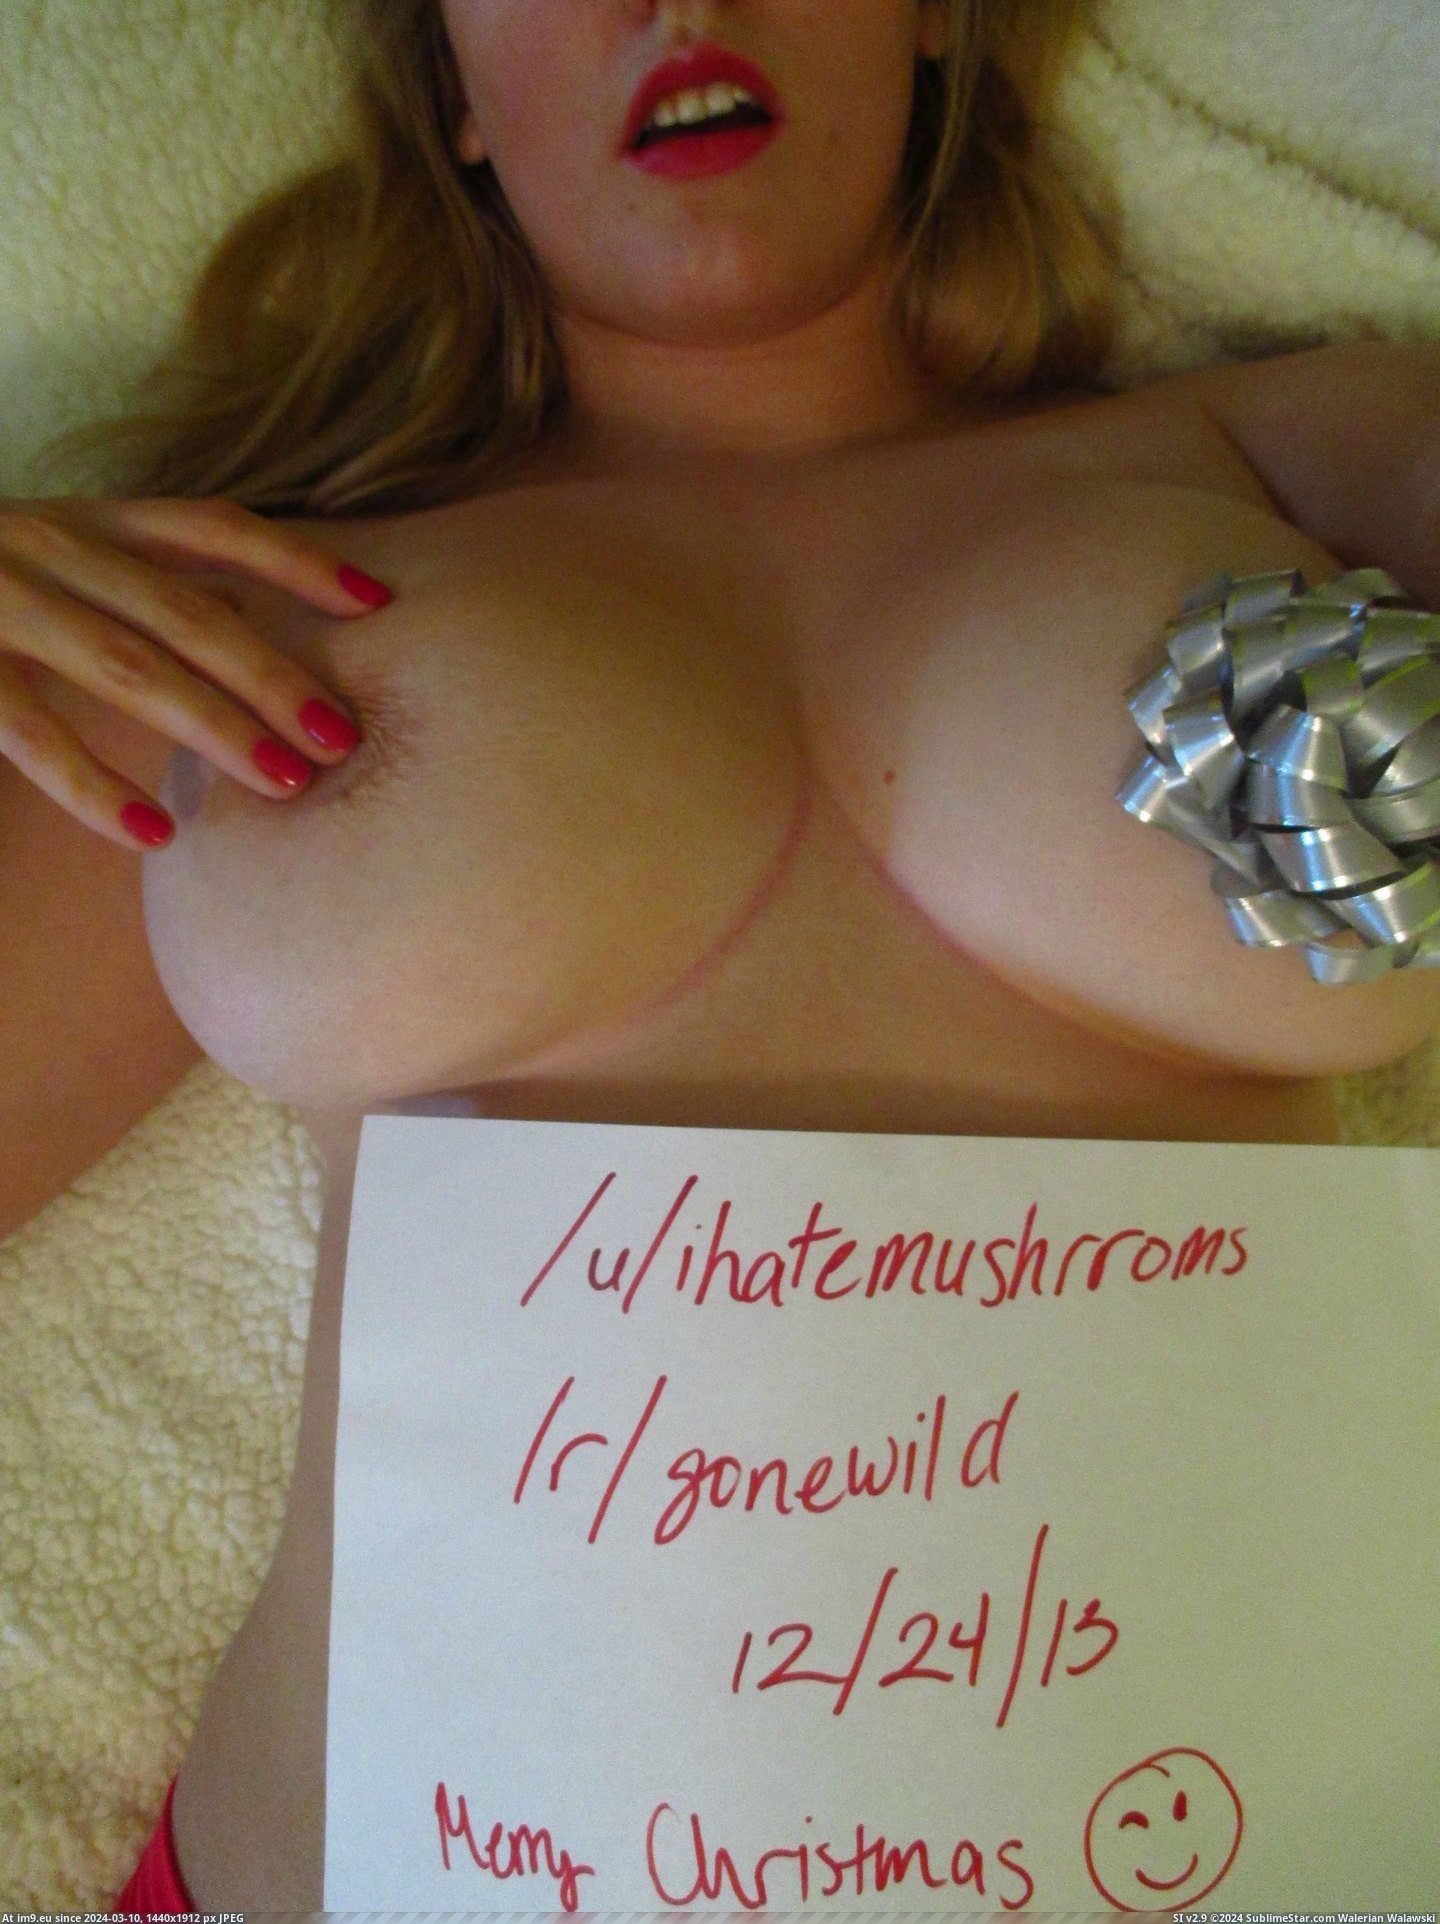 #For #Verification #Exchange #Downstairs #Peek #Unwrap [Gonewild] Who's up for a gi[f]t exchange? I'll unwrap myself for some verification (plus a little peek downstairs) 3 Pic. (Image of album My r/GONEWILD favs))